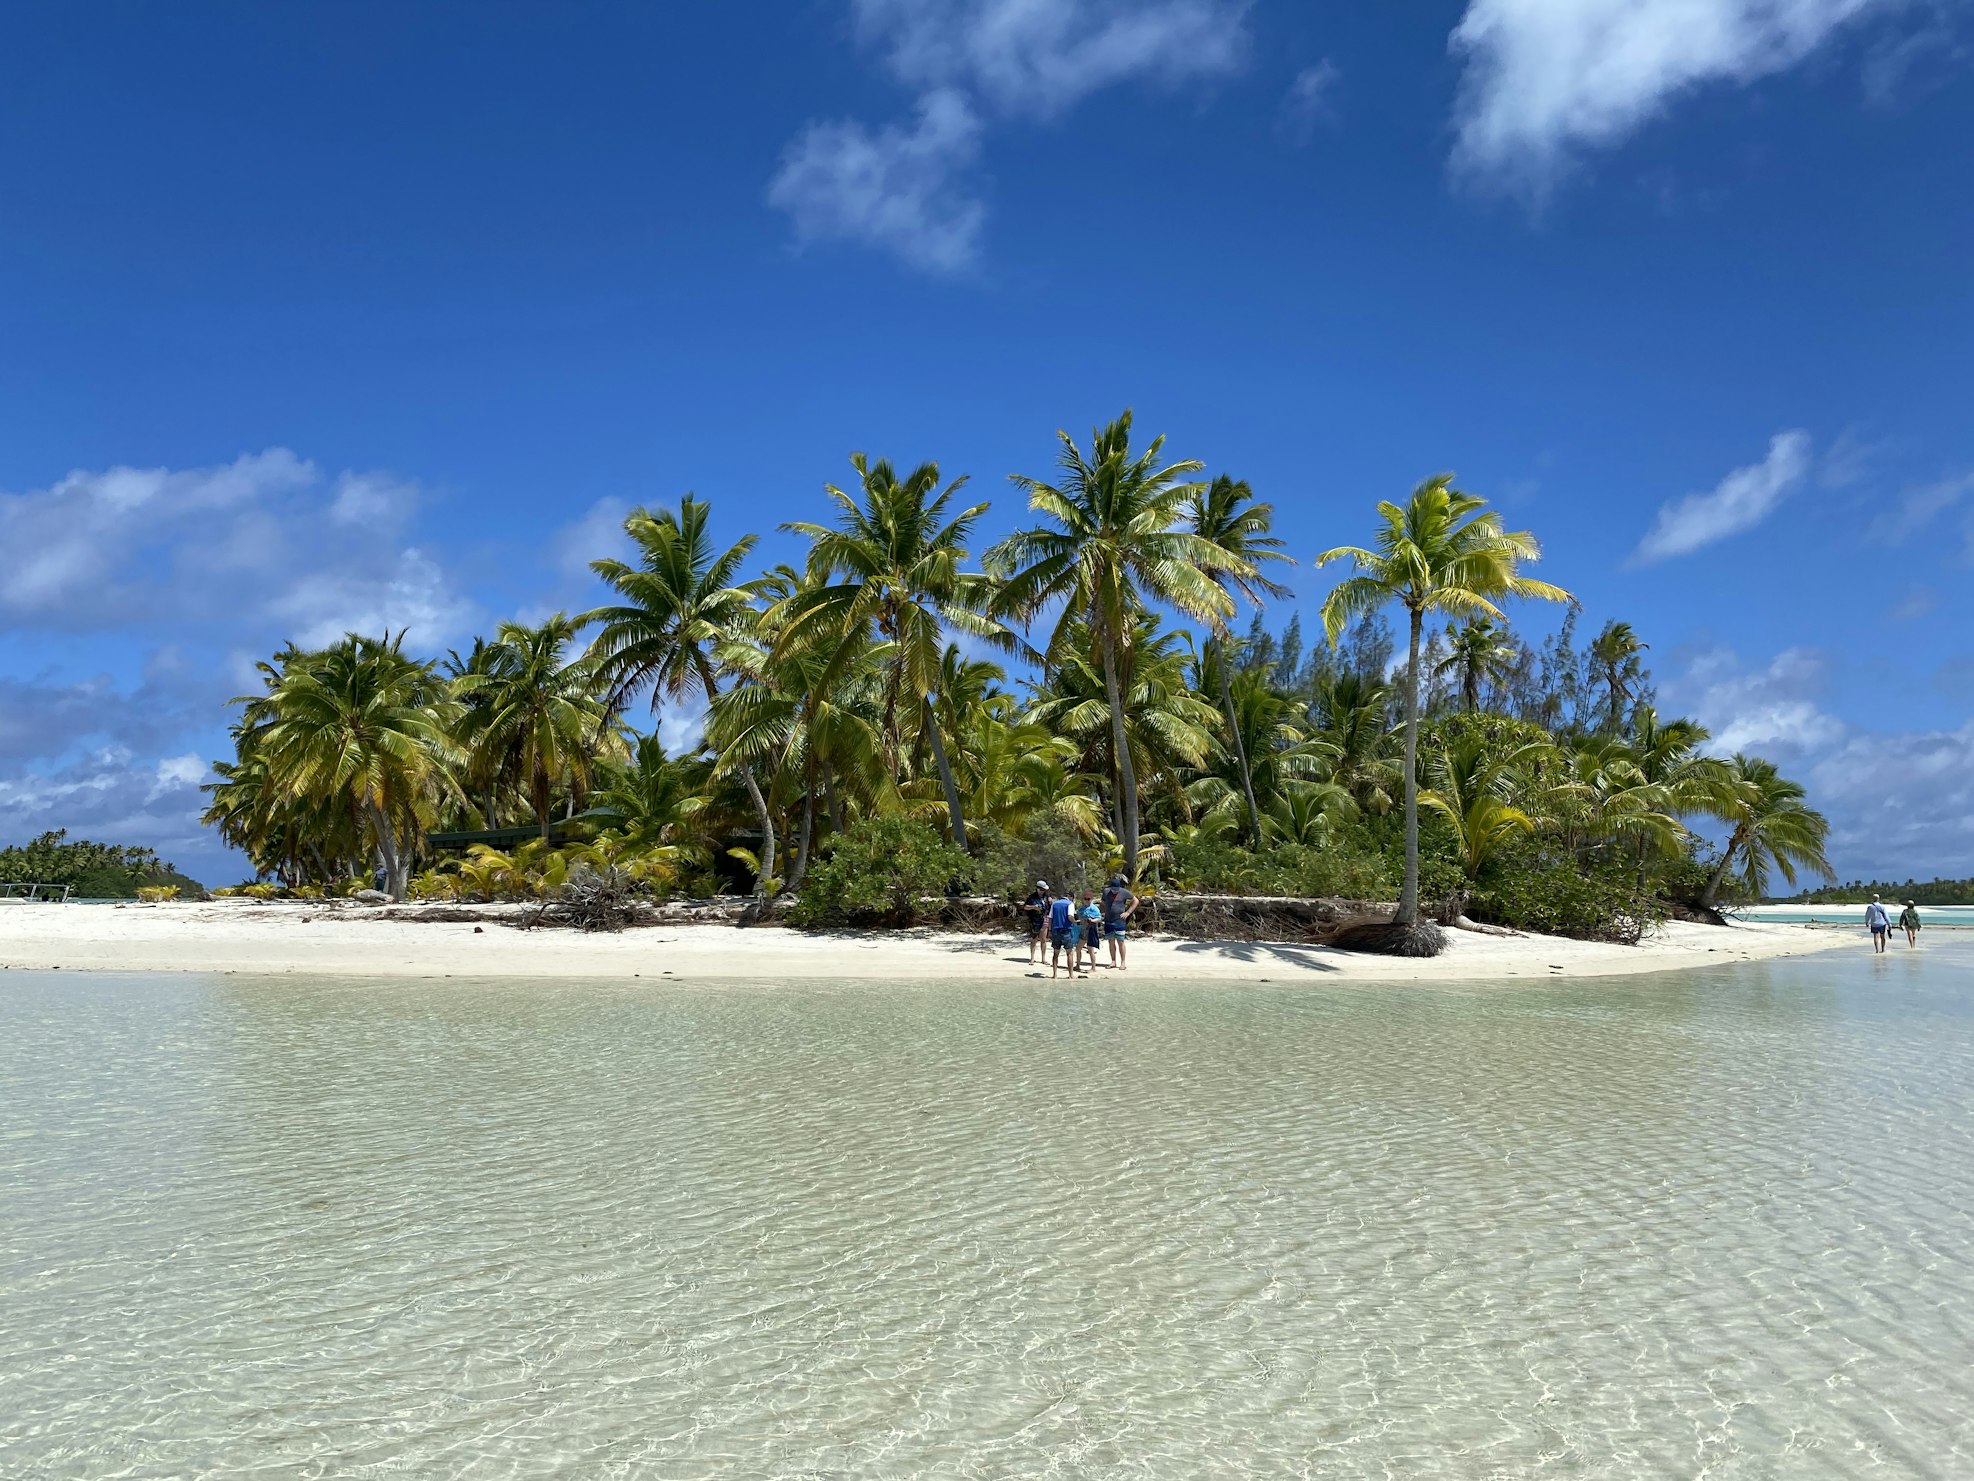 Cook Islands Travel Guide - Attractions, What to See, Do, Costs, FAQs